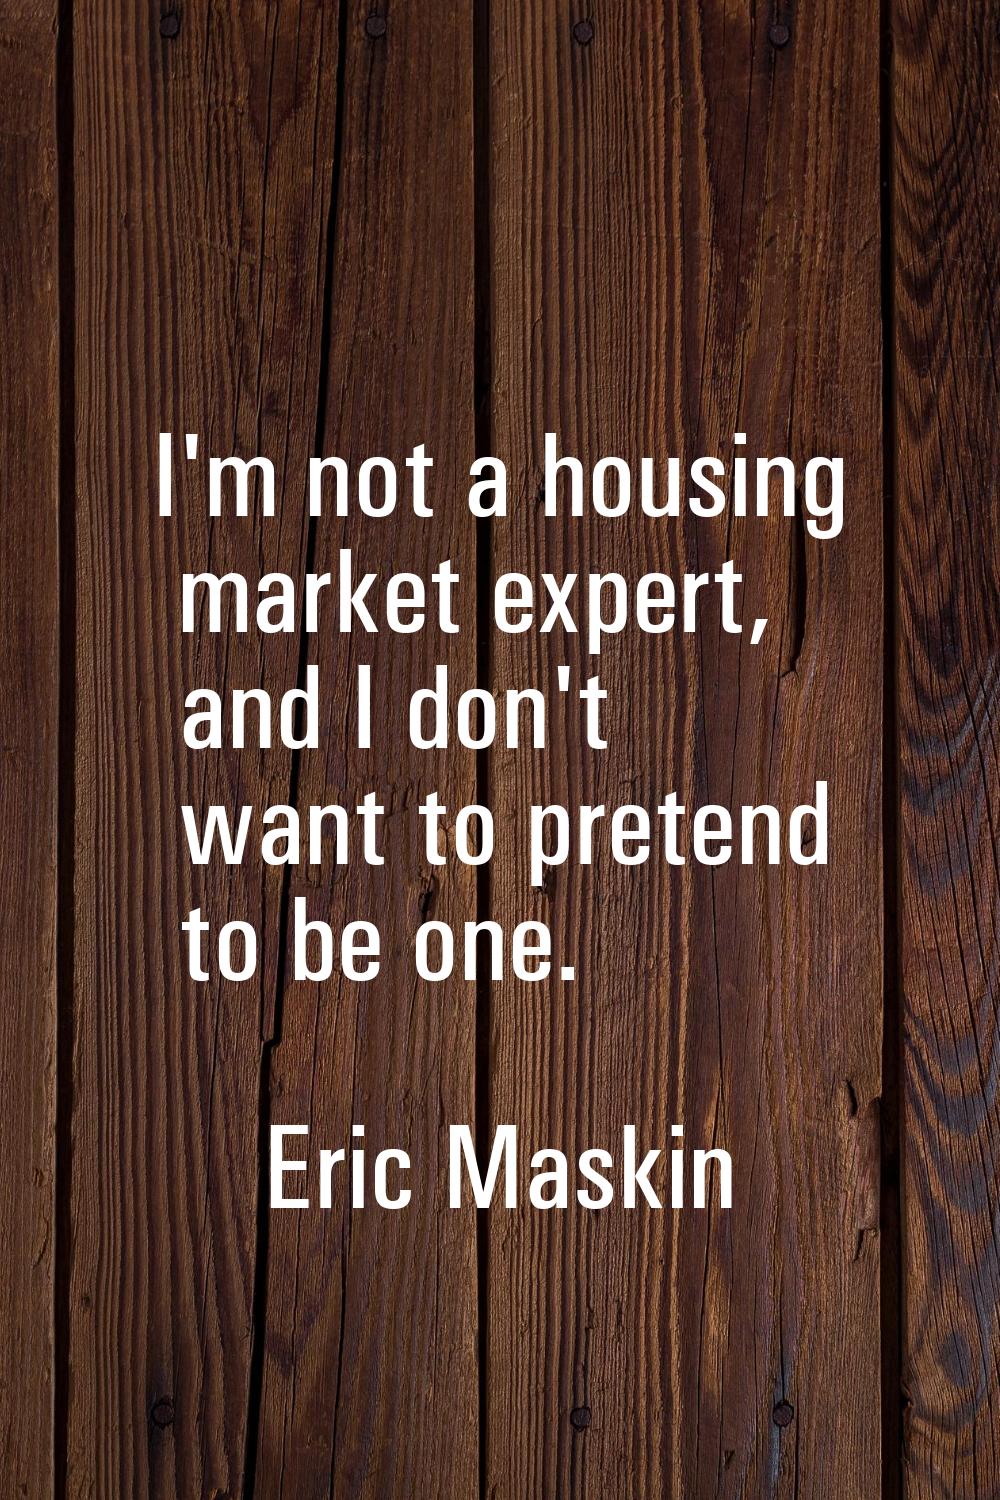 I'm not a housing market expert, and I don't want to pretend to be one.